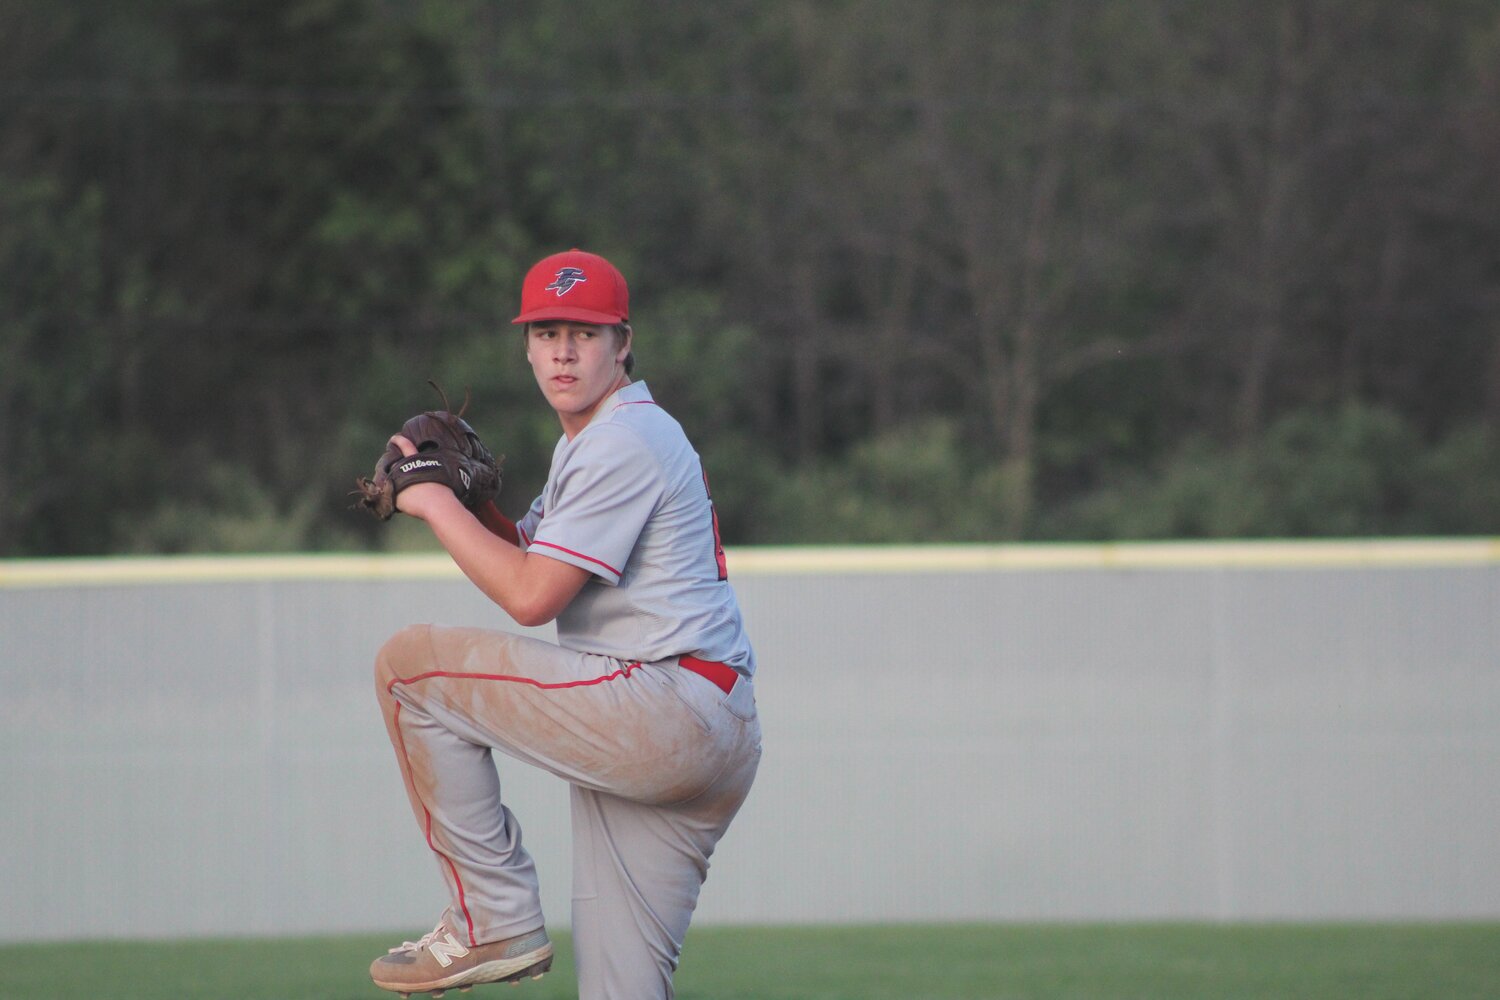 Codey Emerson/Journal Review
Freshman Gunnar Shirk came in to pitch for the Mounties. Shirk has seen playin time this season at third base and helped the Mounties pitching staff.